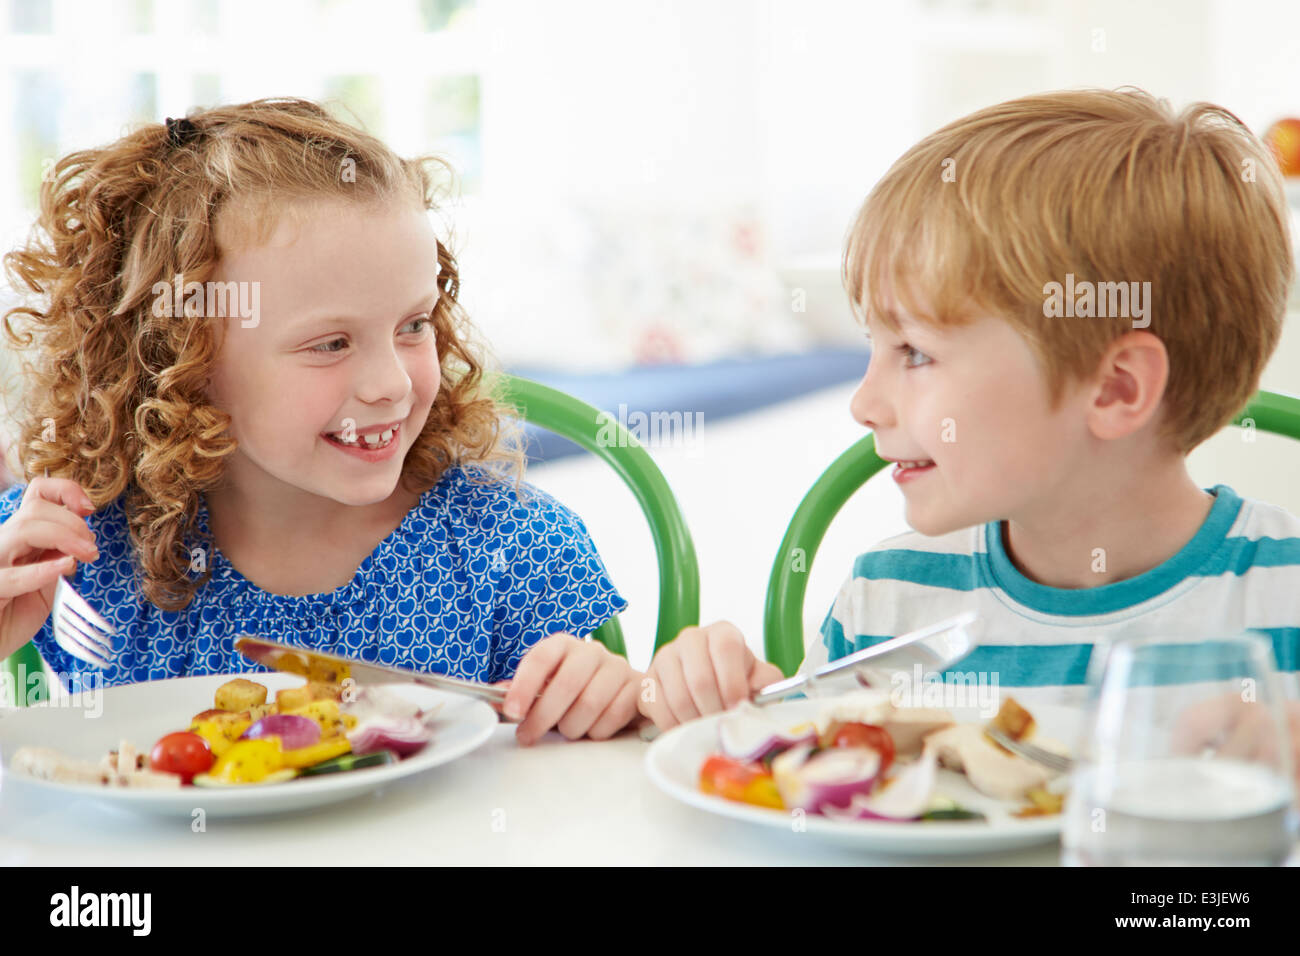 Two Children Eating Meal At Home Together Stock Photo